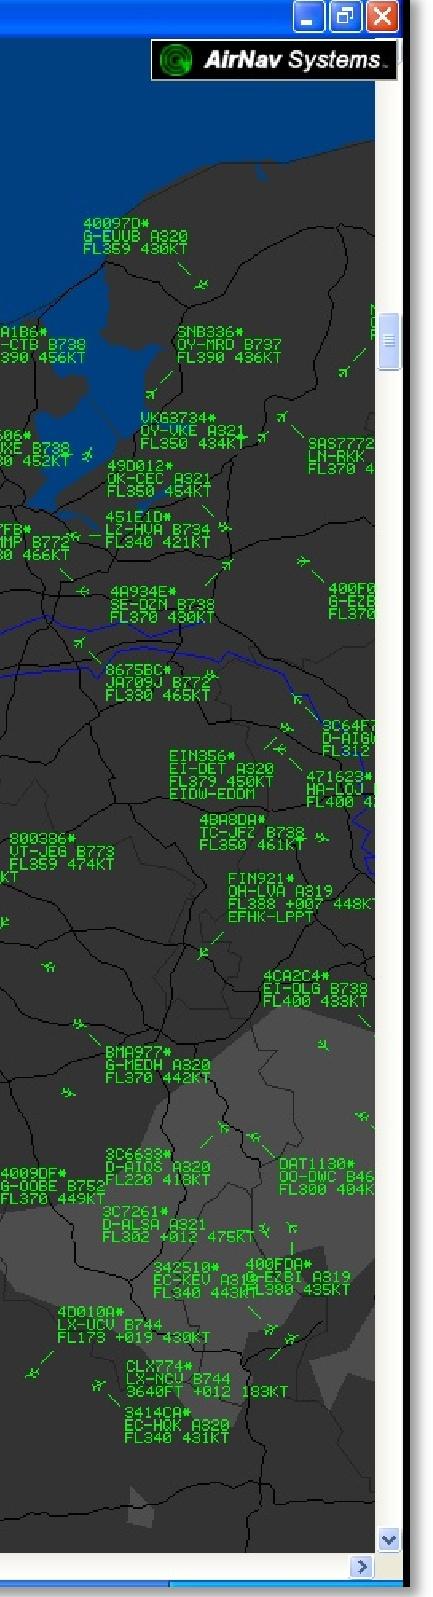 Midlands viewing live and Network data for aircraft in the southern UK and NW Europe The AirNav is the only provider of shared Network data of this